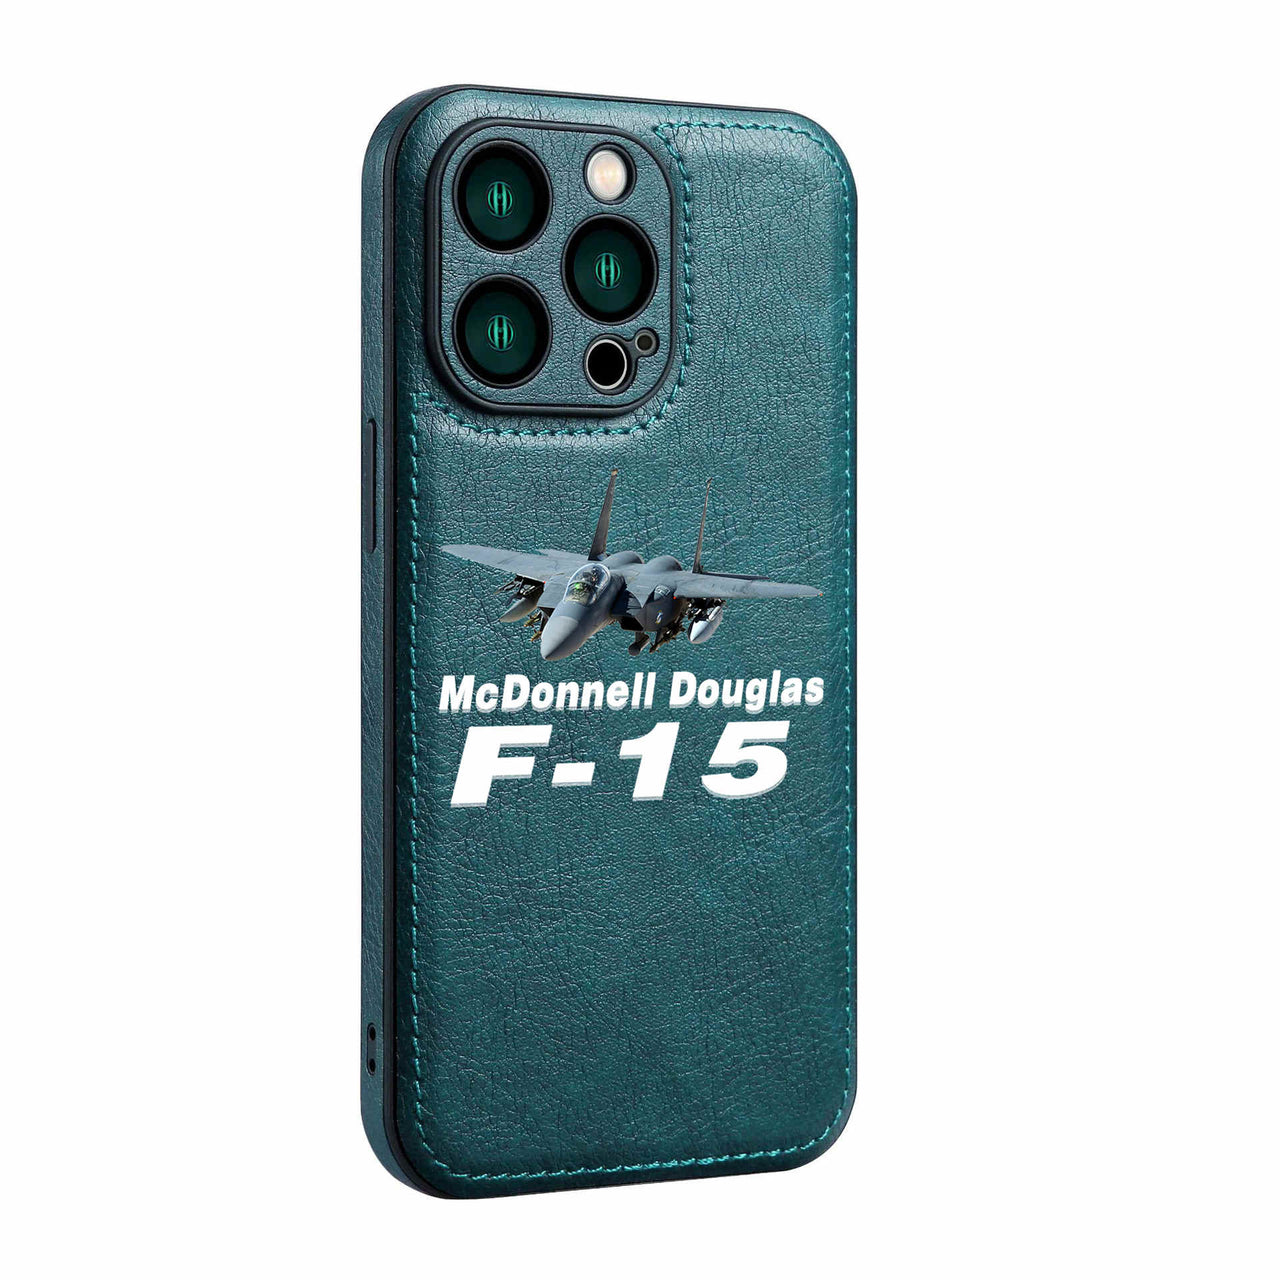 The McDonnell Douglas F15 Designed Leather iPhone Cases